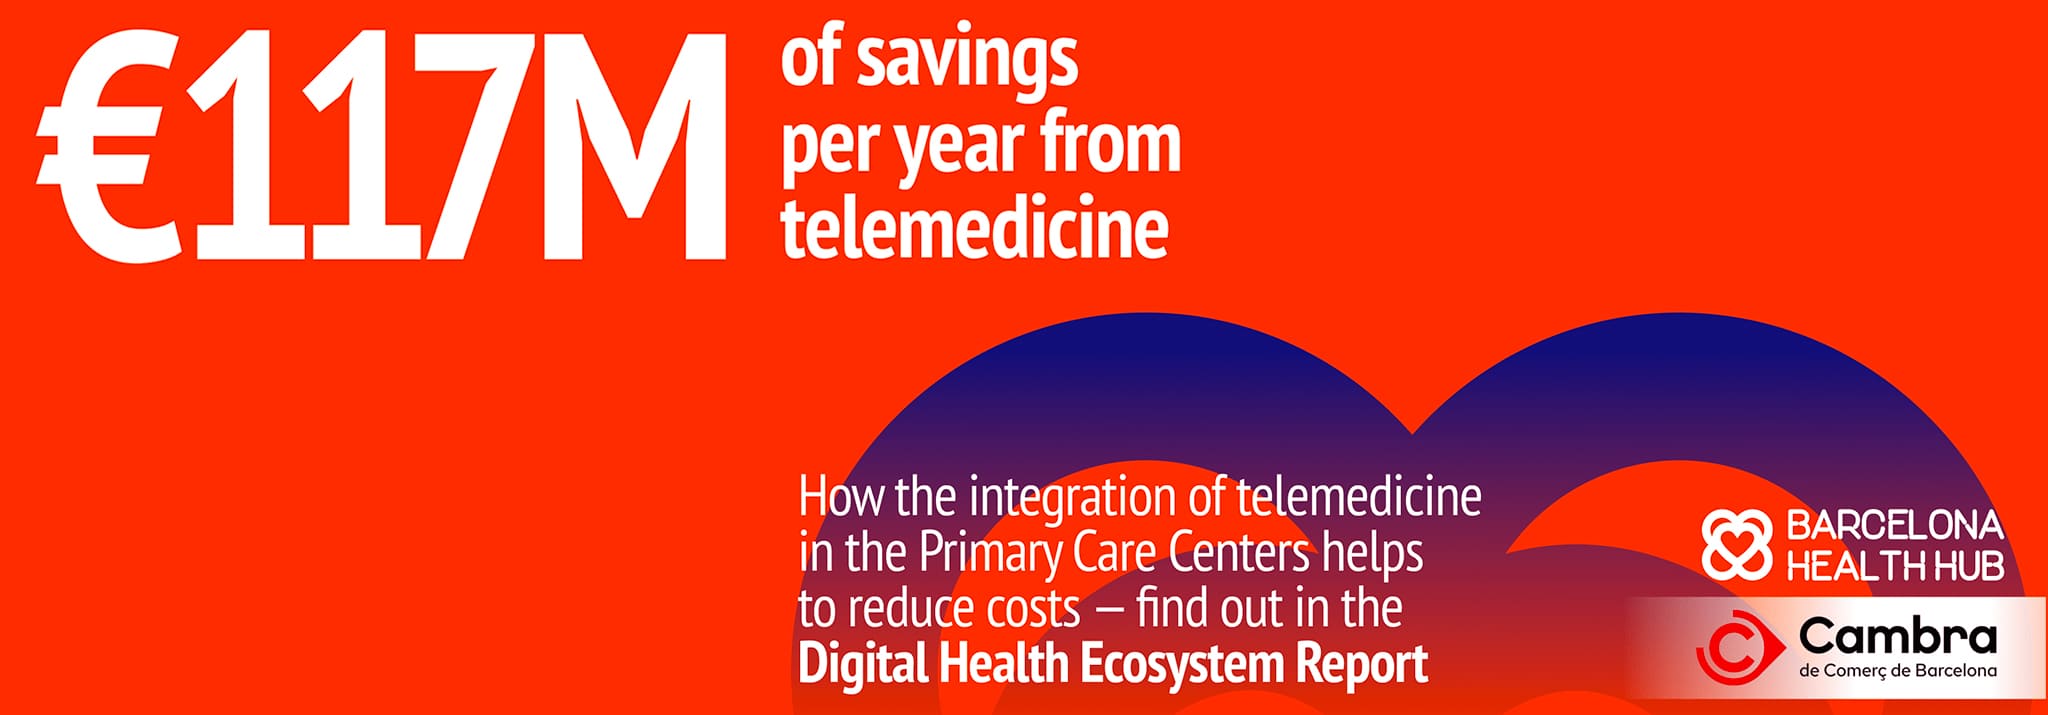 The consolidation of virtual consultation in the Primary Care Centers of rural areas could save up to €117 M per year